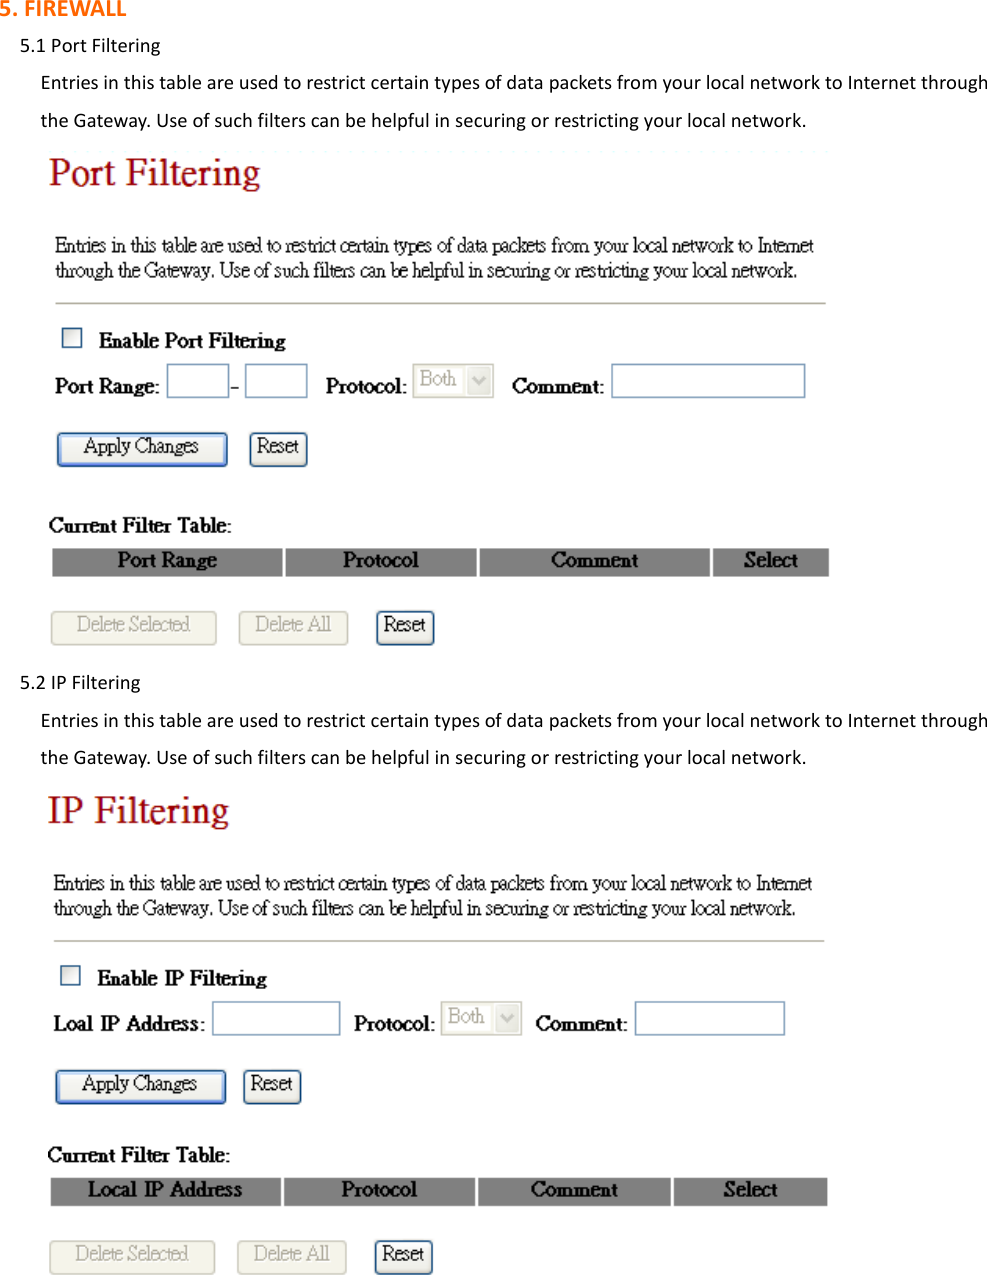 5. FIREWALL     5.1 Port Filtering Entries in this table are used to restrict certain types of data packets from your local network to Internet through the Gateway. Use of such filters can be helpful in securing or restricting your local network.      5.2 IP Filtering Entries in this table are used to restrict certain types of data packets from your local network to Internet through the Gateway. Use of such filters can be helpful in securing or restricting your local network.             